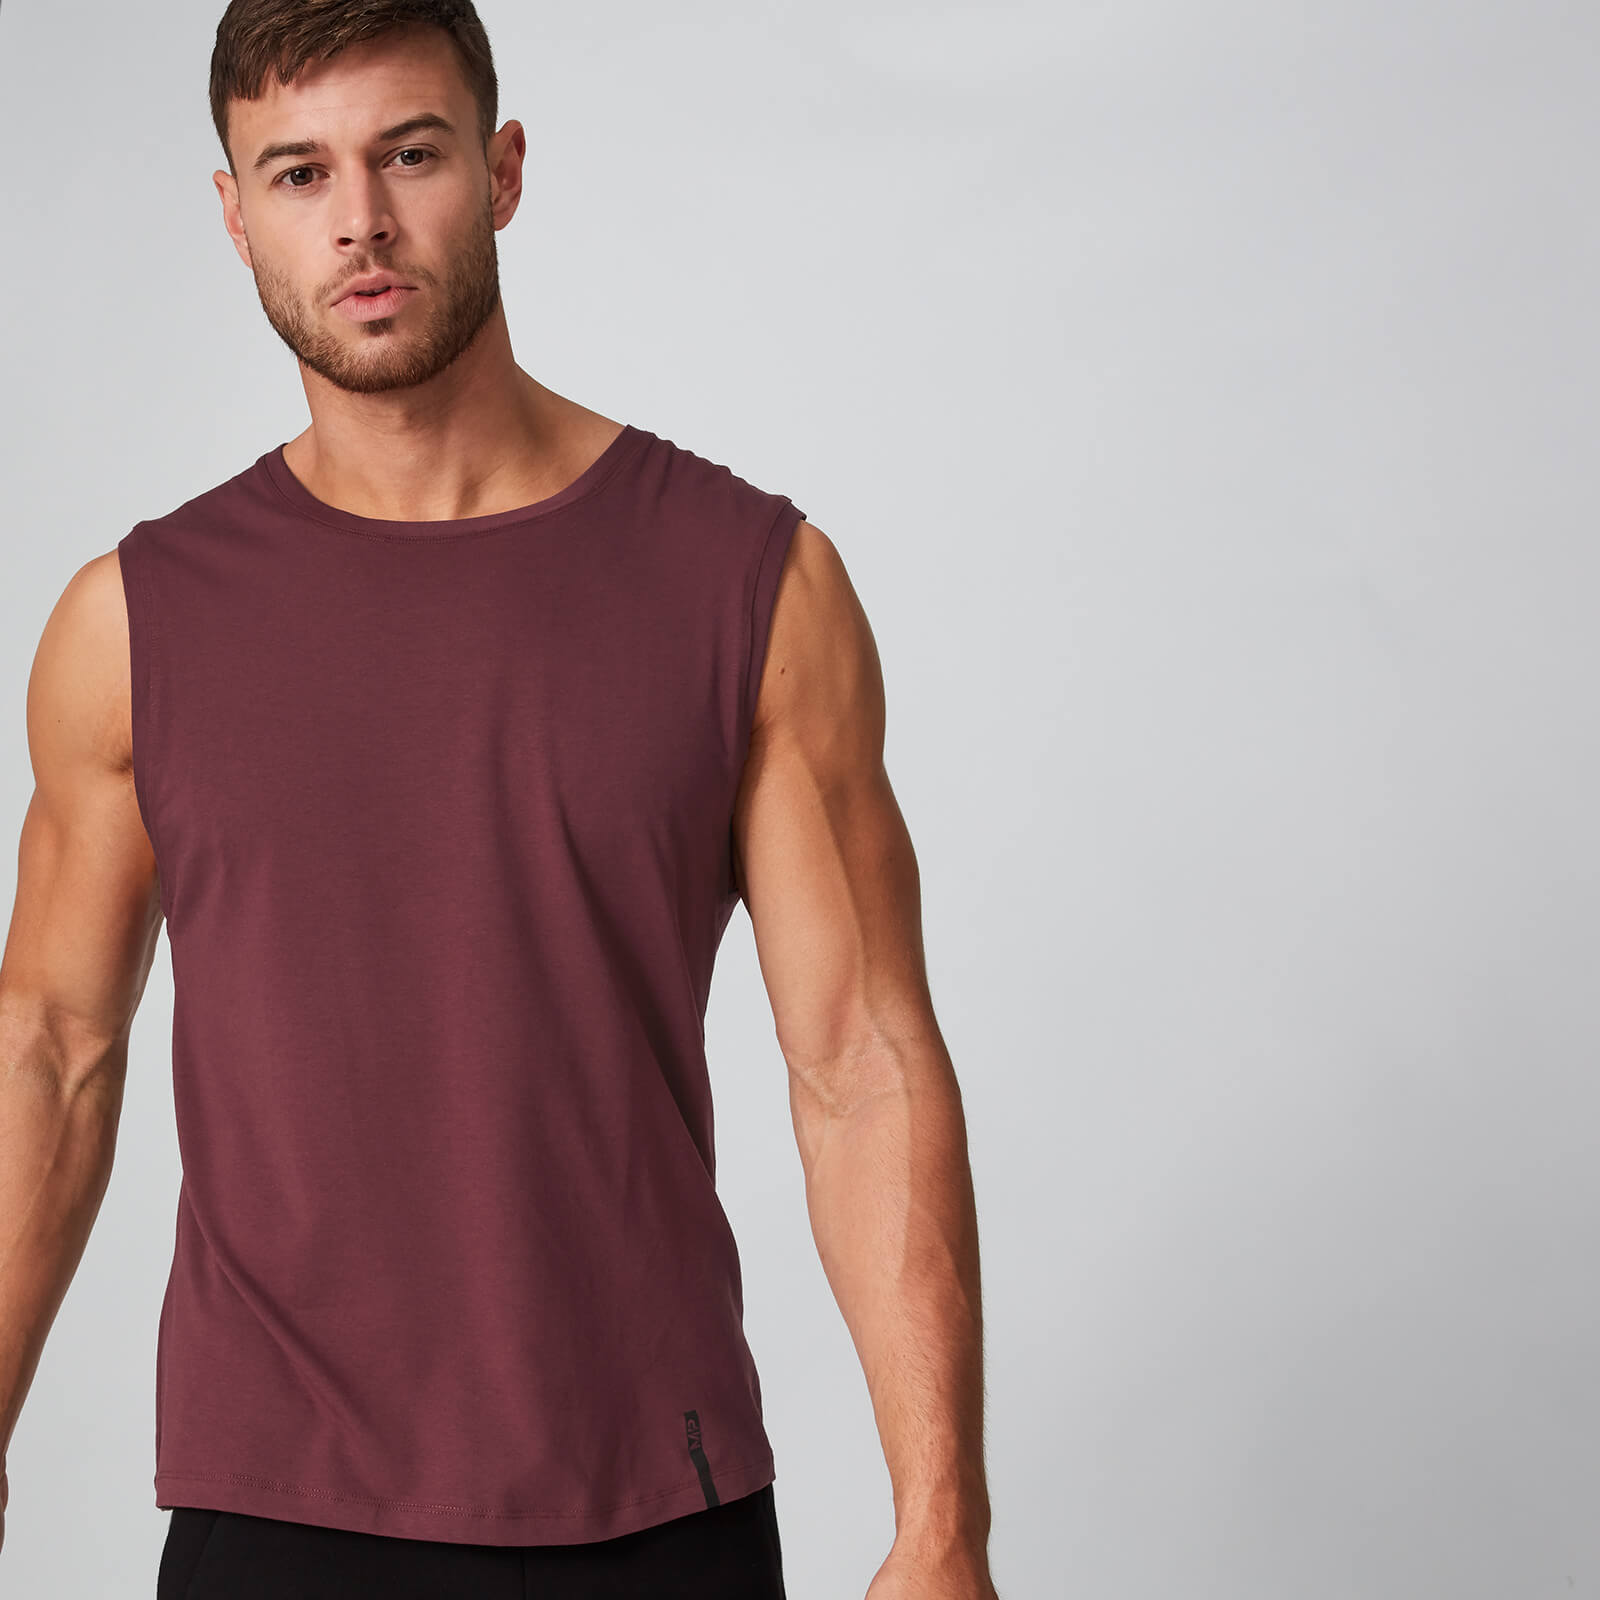 Myprotein Luxe Classic Sleeveless T-Shirt - Oxblood - XS